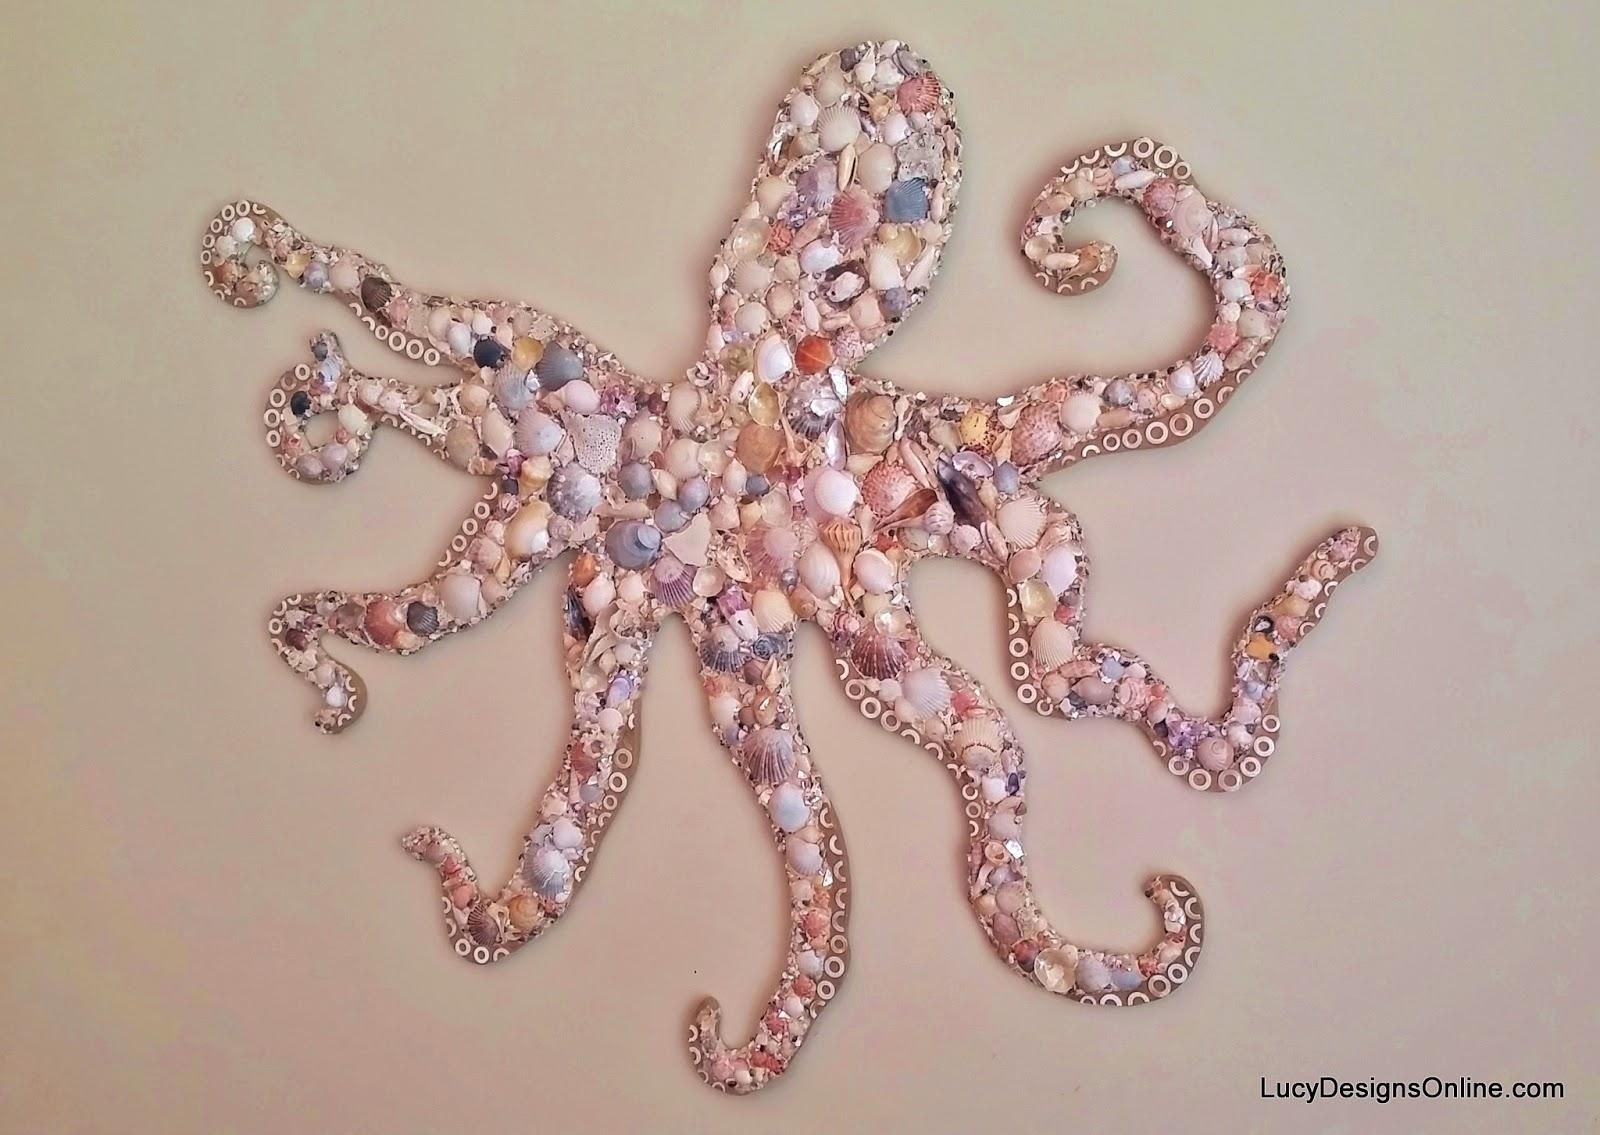 Octopus, Seahorse And Sea Turtle Wall Art, Stained Glass And With Regard To Wall Art With Seashells (Photo 5 of 20)